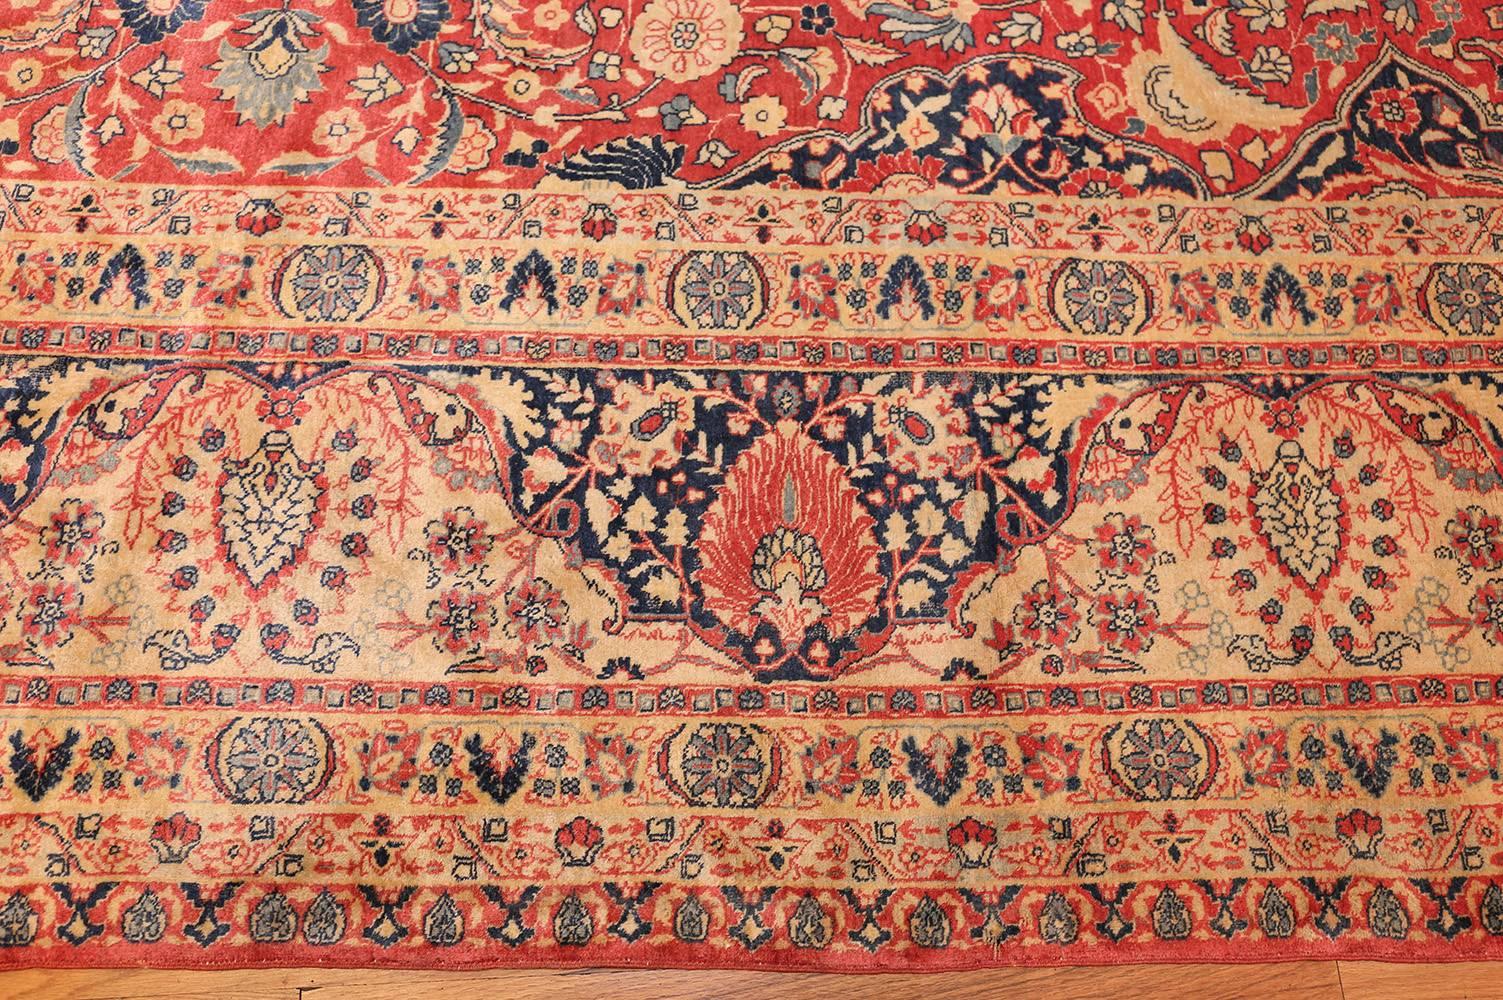 Hand-Knotted Antique Persian Tabriz Carpet. Size: 14 ft 10 in x 21 ft 5 in (4.52 m x 6.53 m)